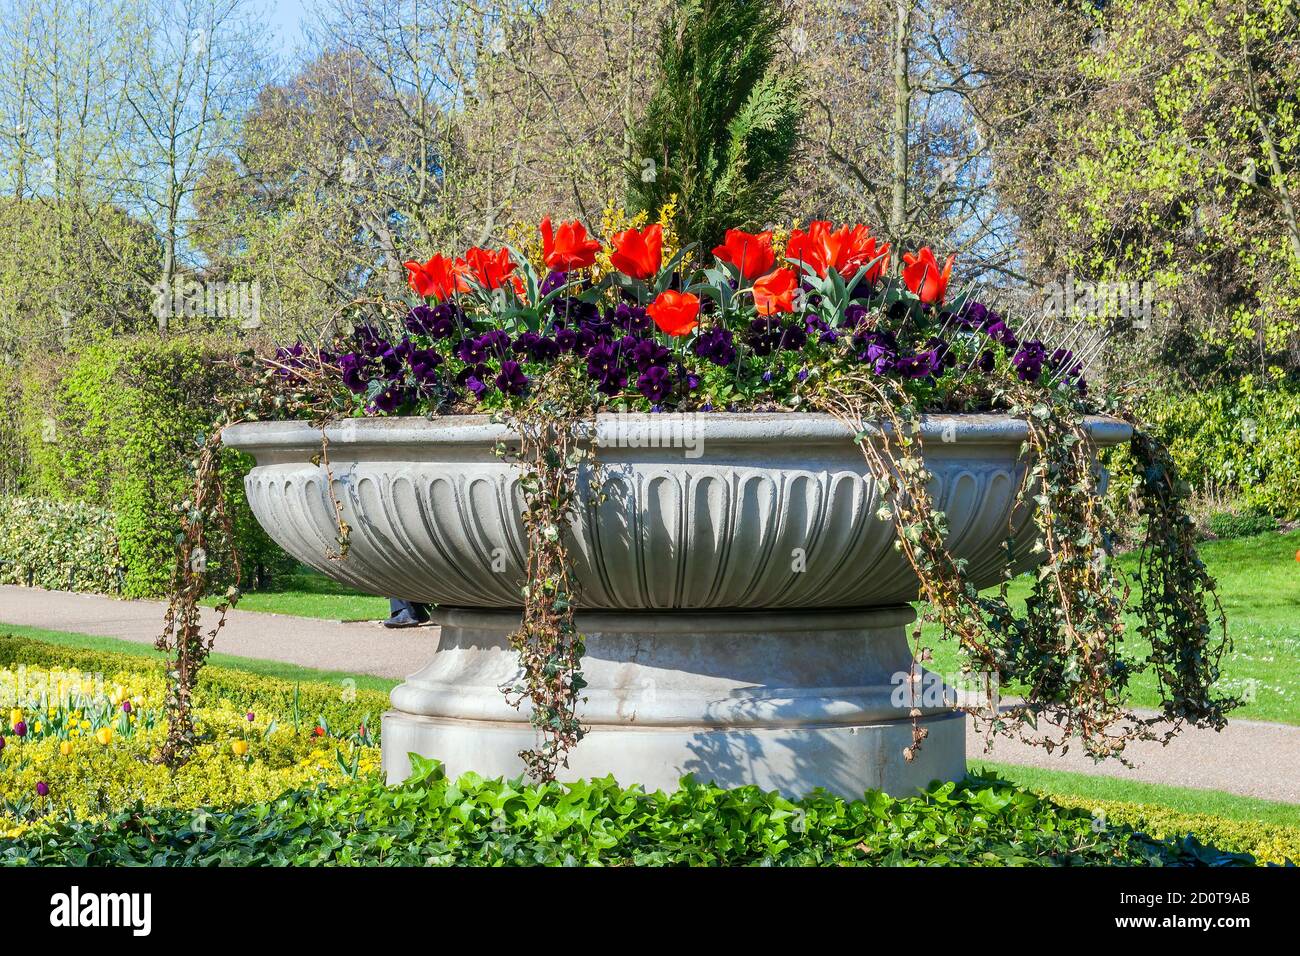 Regents Park spring urn flower display in a floral flower bed which is a popular public open space in London England UK and a popular travel destinati Stock Photo